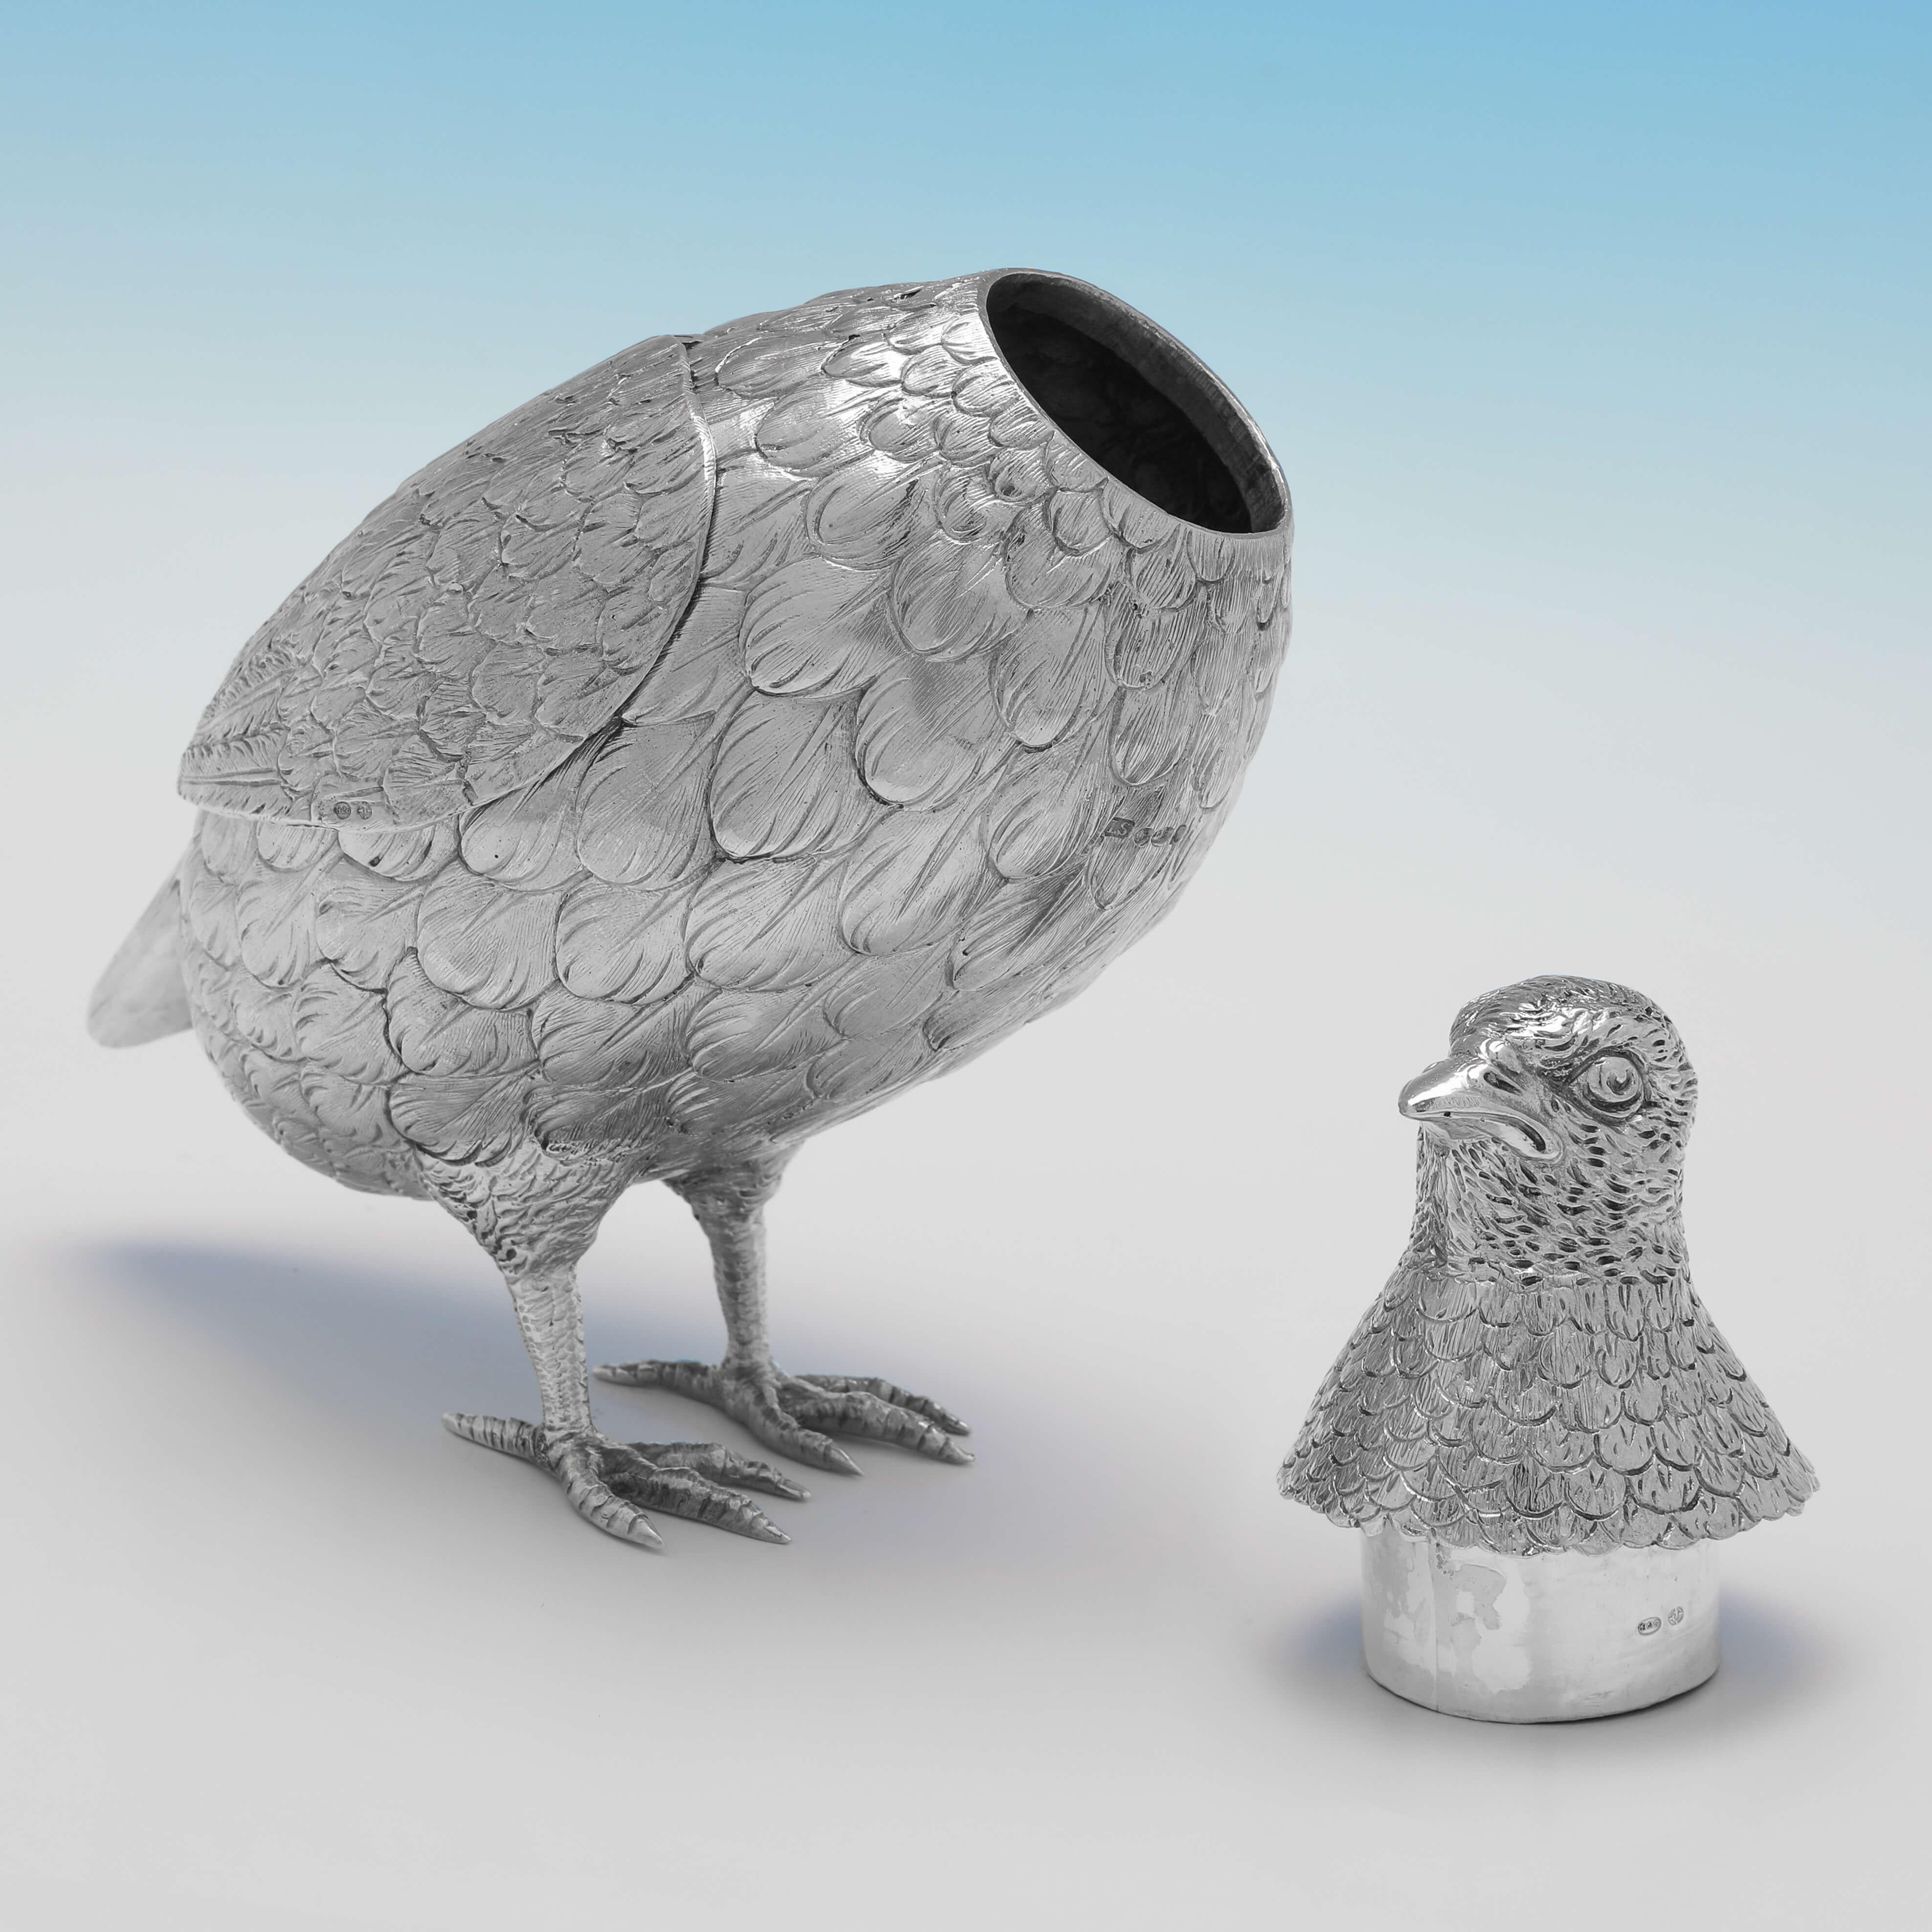 Victorian Matched Pair of Antique Sterling Silver Models of Partridges, 1897 & 1925